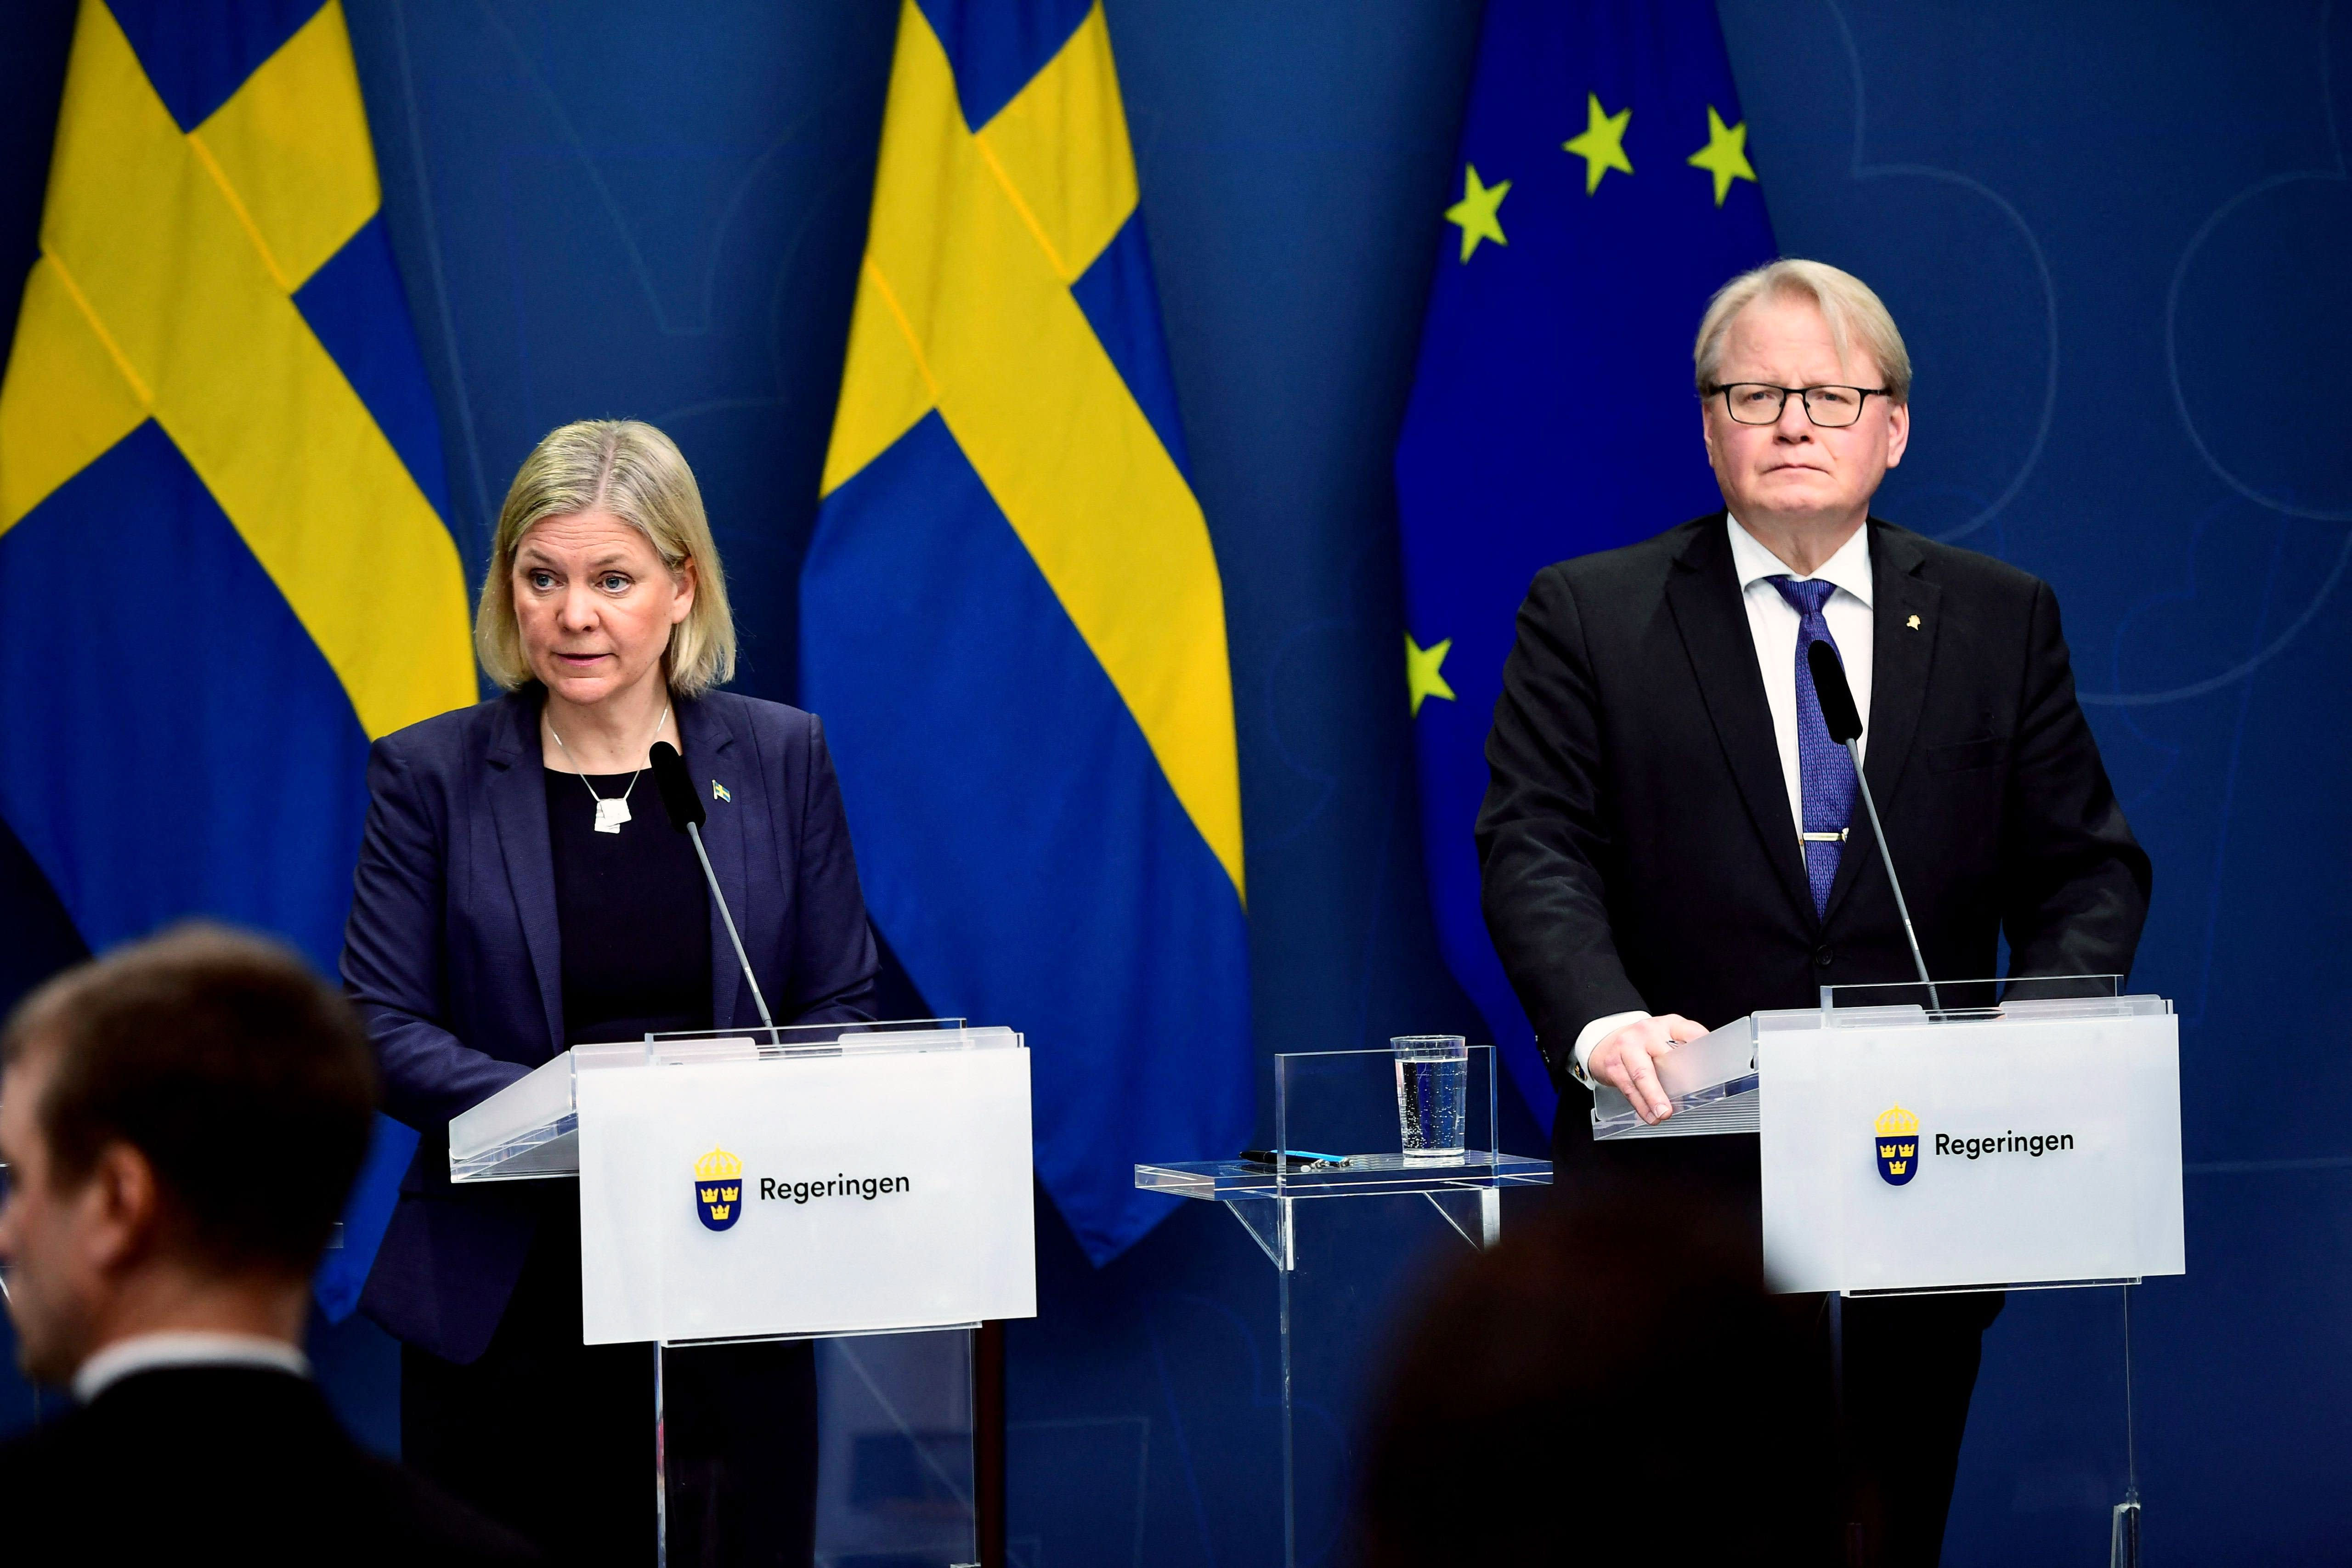 The Swedish Prime Minister, Minister of Defense, will visit Finland on Saturday